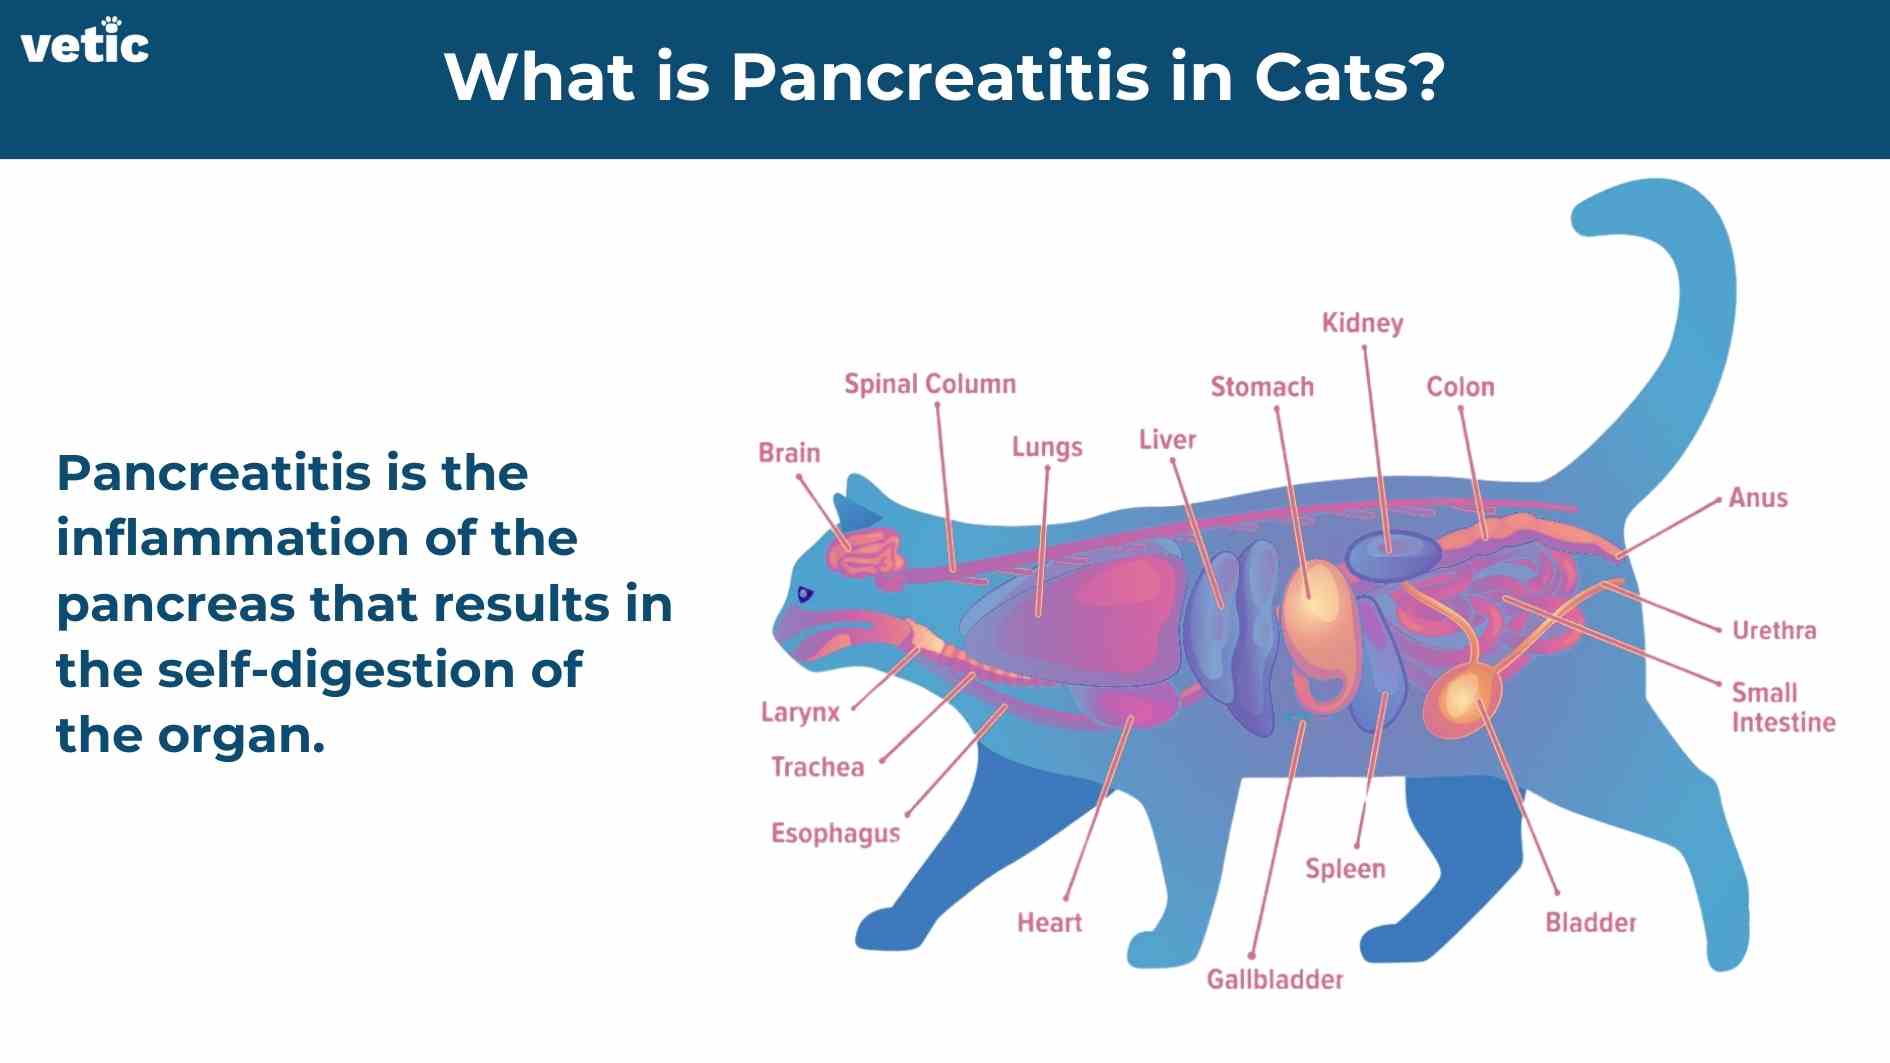 infographic titled 'what is pancreatitis in cats?' with the Vetic logo. Pancreatitis is the inflammation of the pancreas that results in the self-digestion of the organ. the image has the outline of a cat in blue and the internal organs visible and lined out that includes the lungs, stomach, liver, gall bladder, small intestine, pancreas, large intestine, kidneys and bladder. The small intestine is high intensity red, since the inflammation of the pancreas causes inflammation of the small intestine as well. The infographic is accompanied by an illustration of the basic anatomy of a cat that shows the location of every major organ and organ system including the liver, pancreas and small intestine.